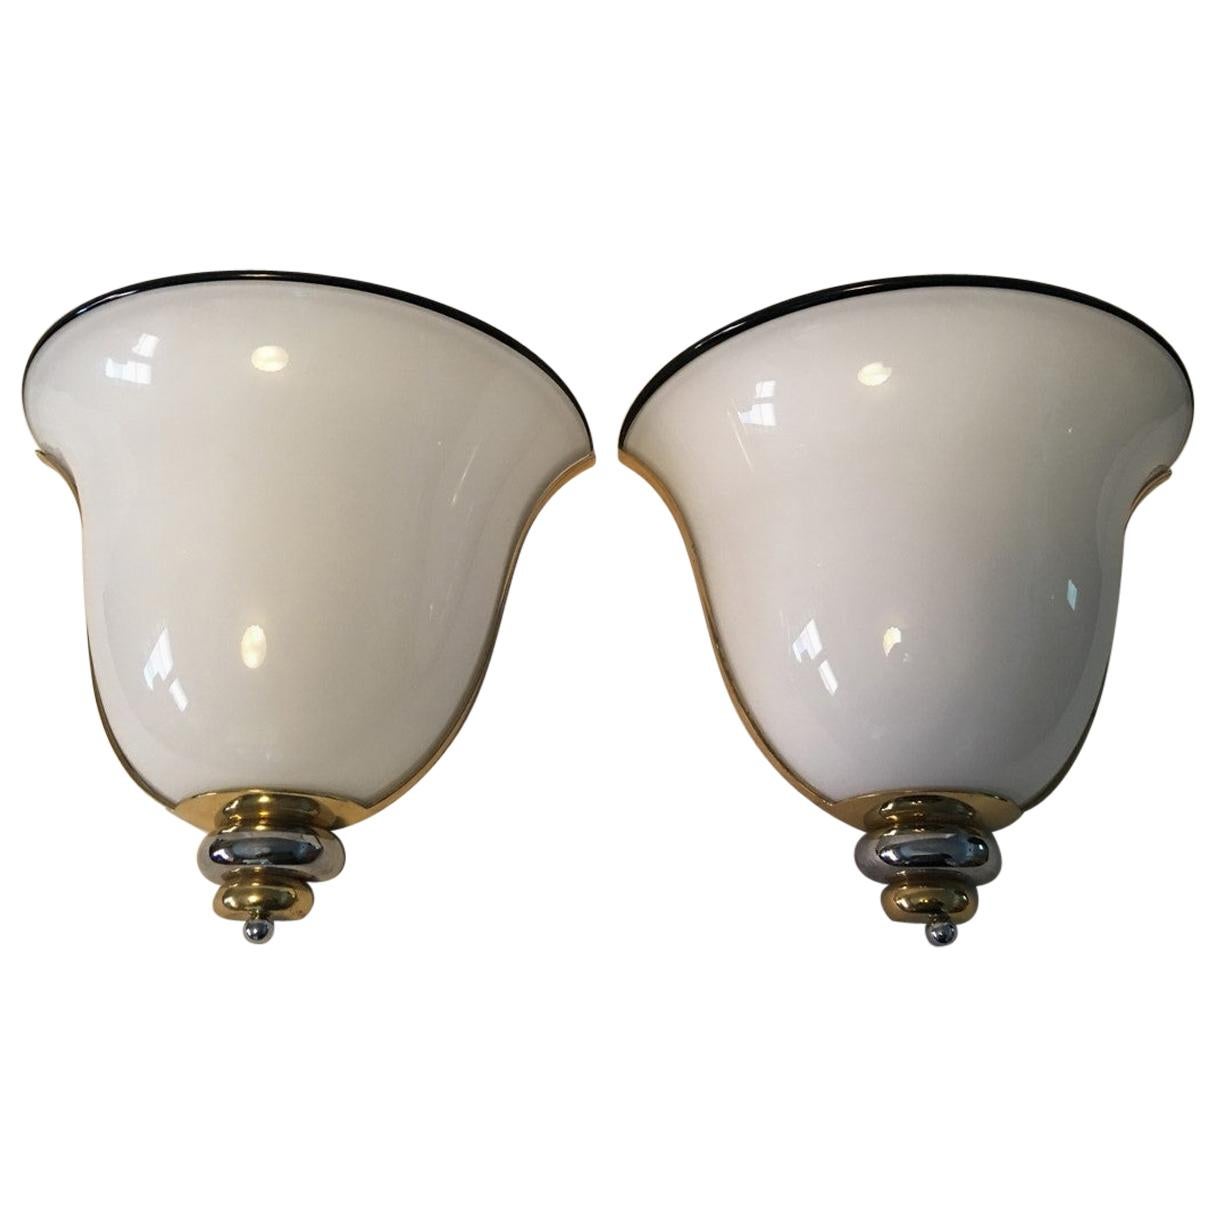 Pair of Milk Glass Brass and Chrome Wall Lights or Sconces by Prearo of Italy For Sale